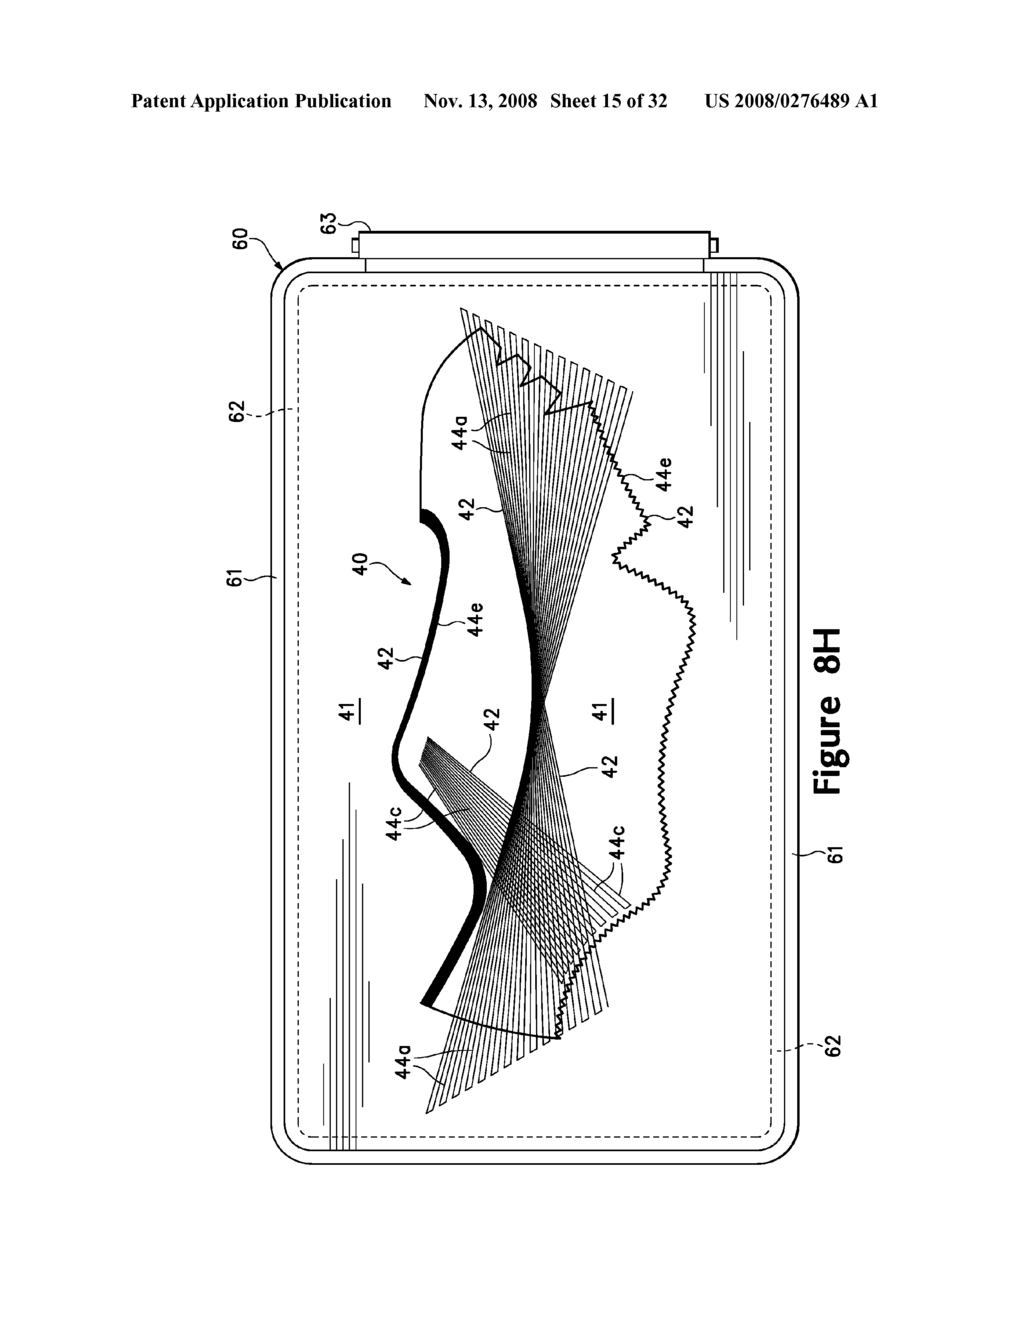 Article Of Footwear Having An Upper With Thread Structural Elements - diagram, schematic, and image 16